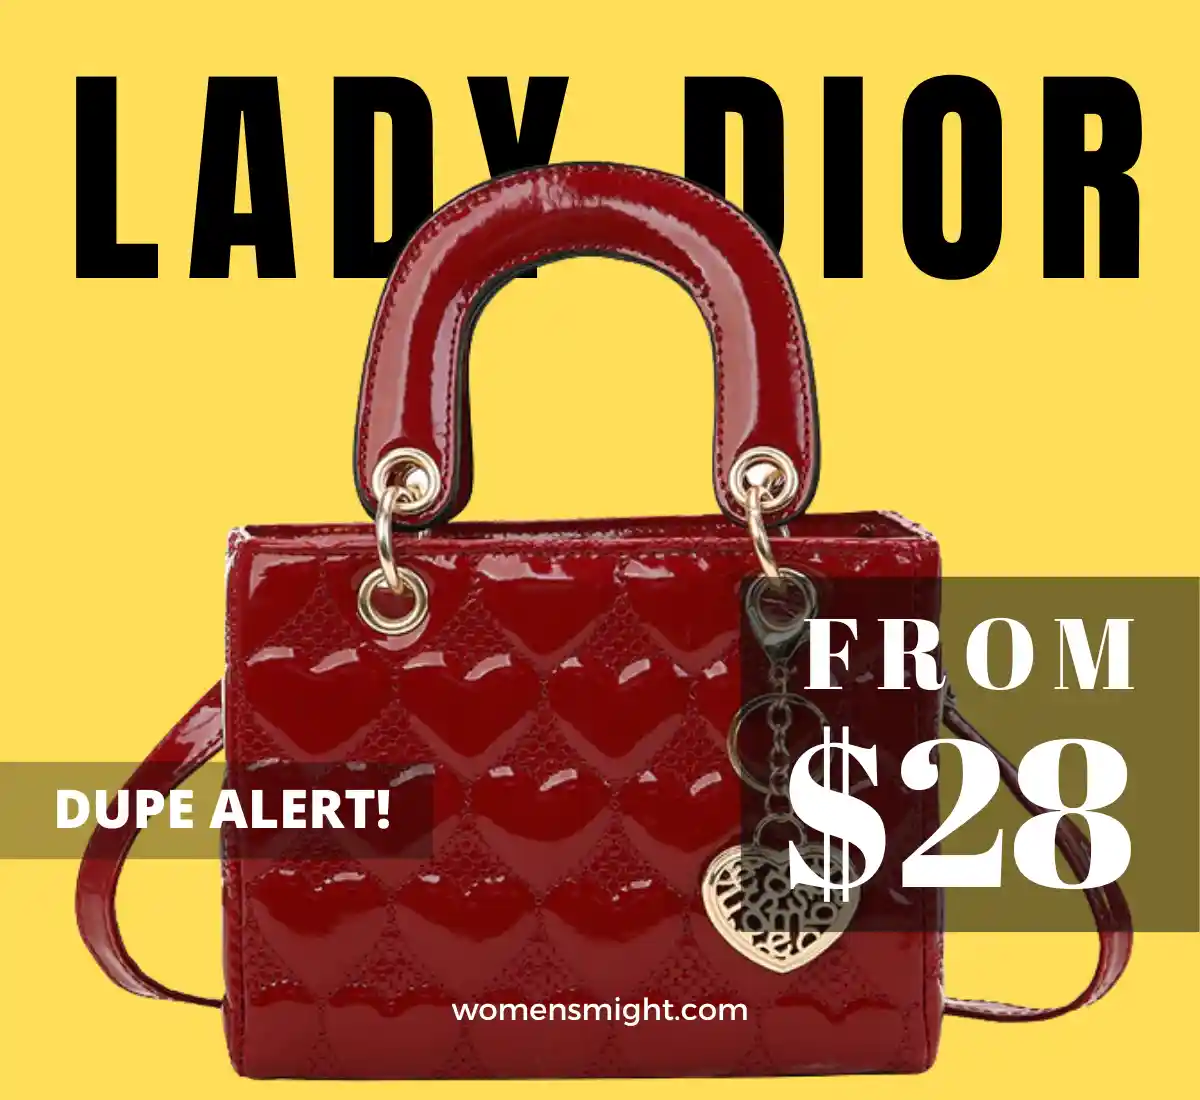 The best lady dior bag dupes (from $28)